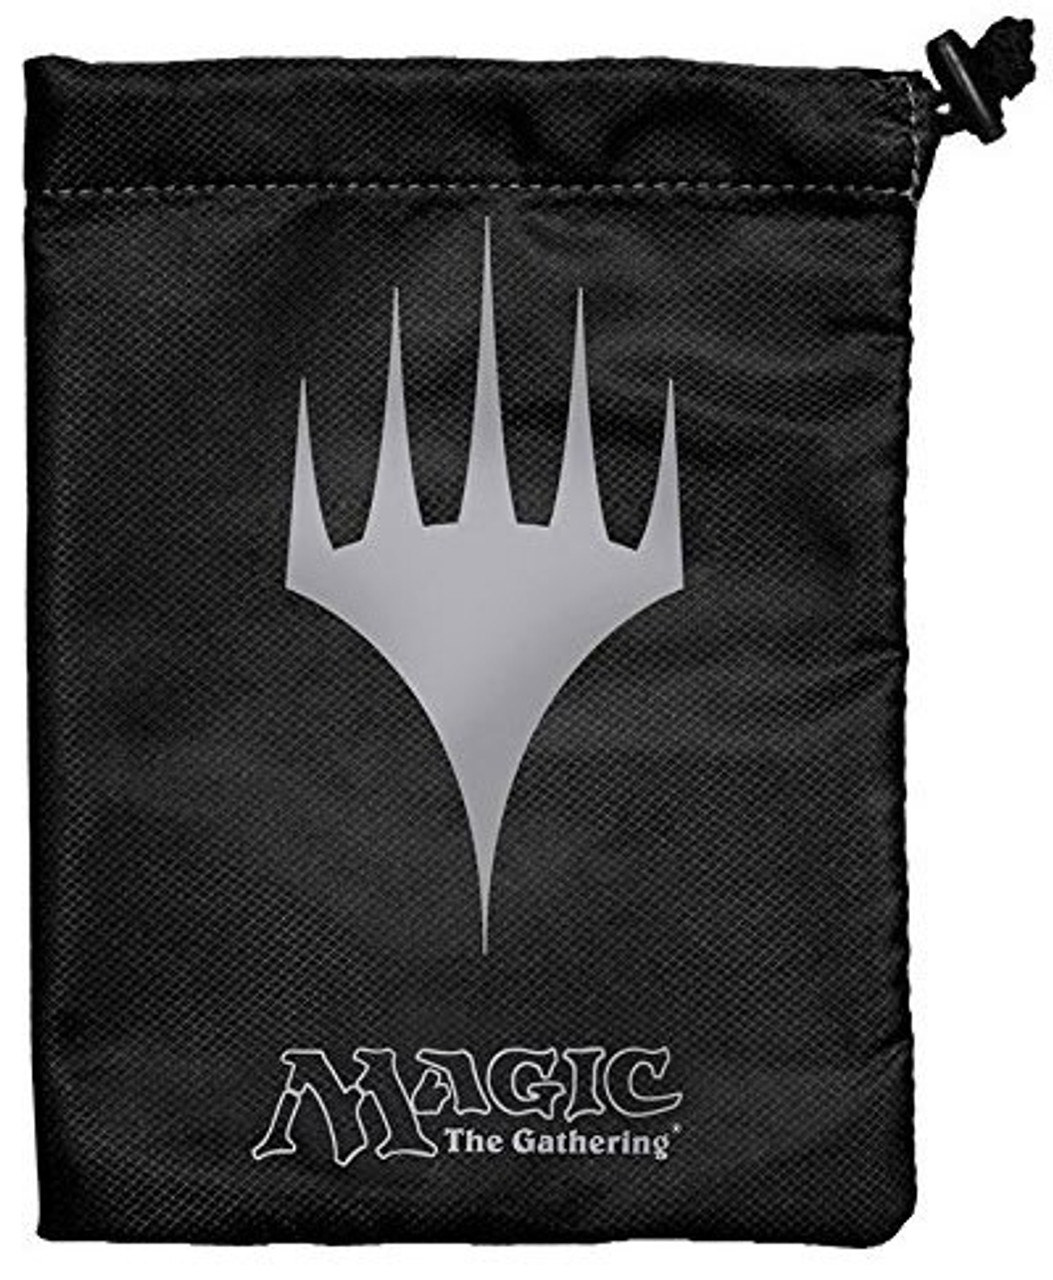 Ultra Pro Magic The Gathering Planeswalker Treasure Nest Dice Bag Toywiz - roblox assassin best throwing knife kill ever omg